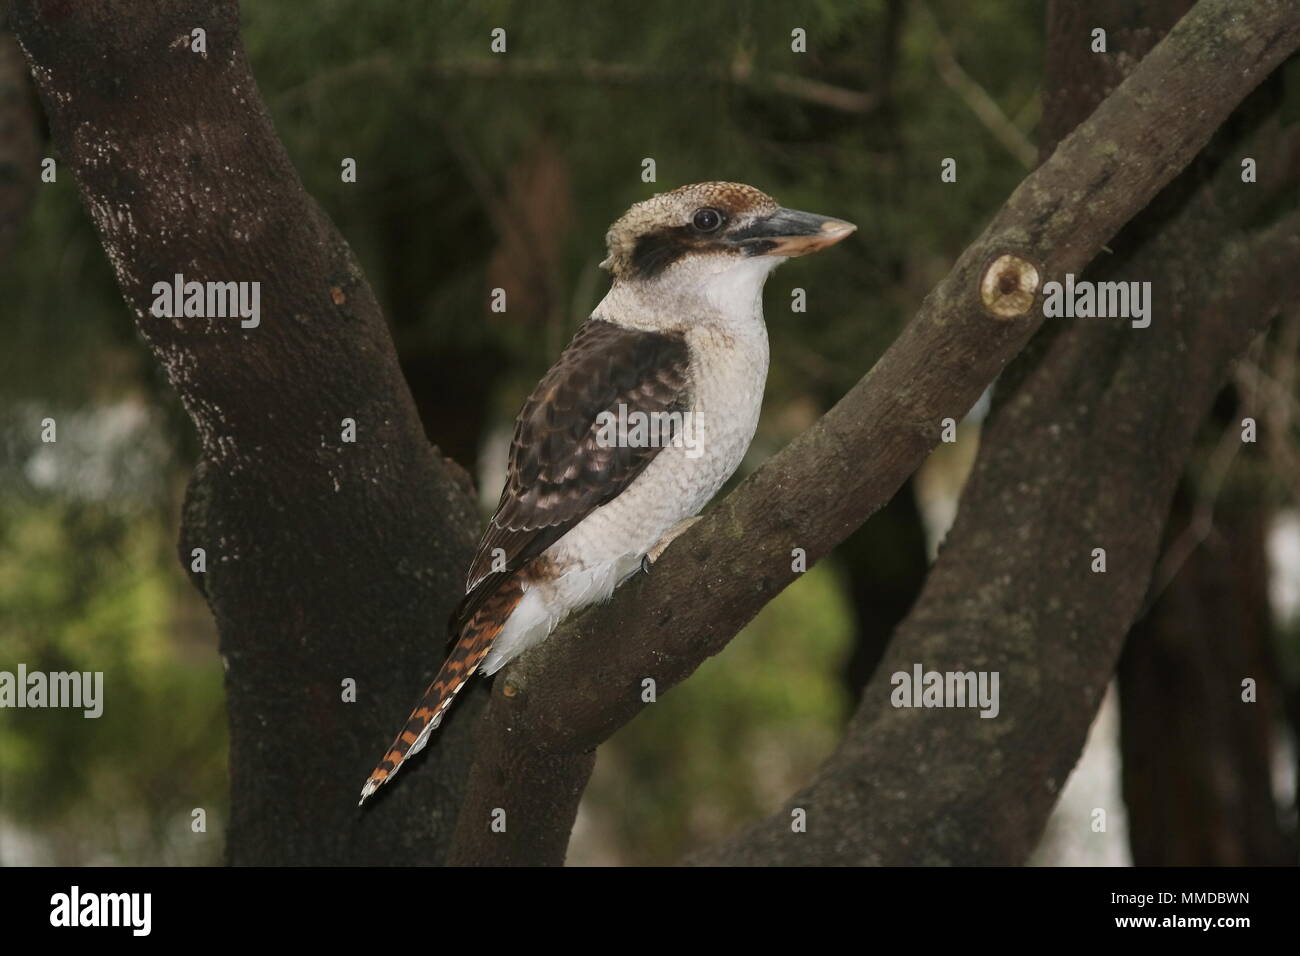 Kookaburra (Dacelo novaeguineae), also known as the Laughing Jackass, perched in the fork of a tree, Wirreader Nature Reserve, Boronia, Australia. Stock Photo